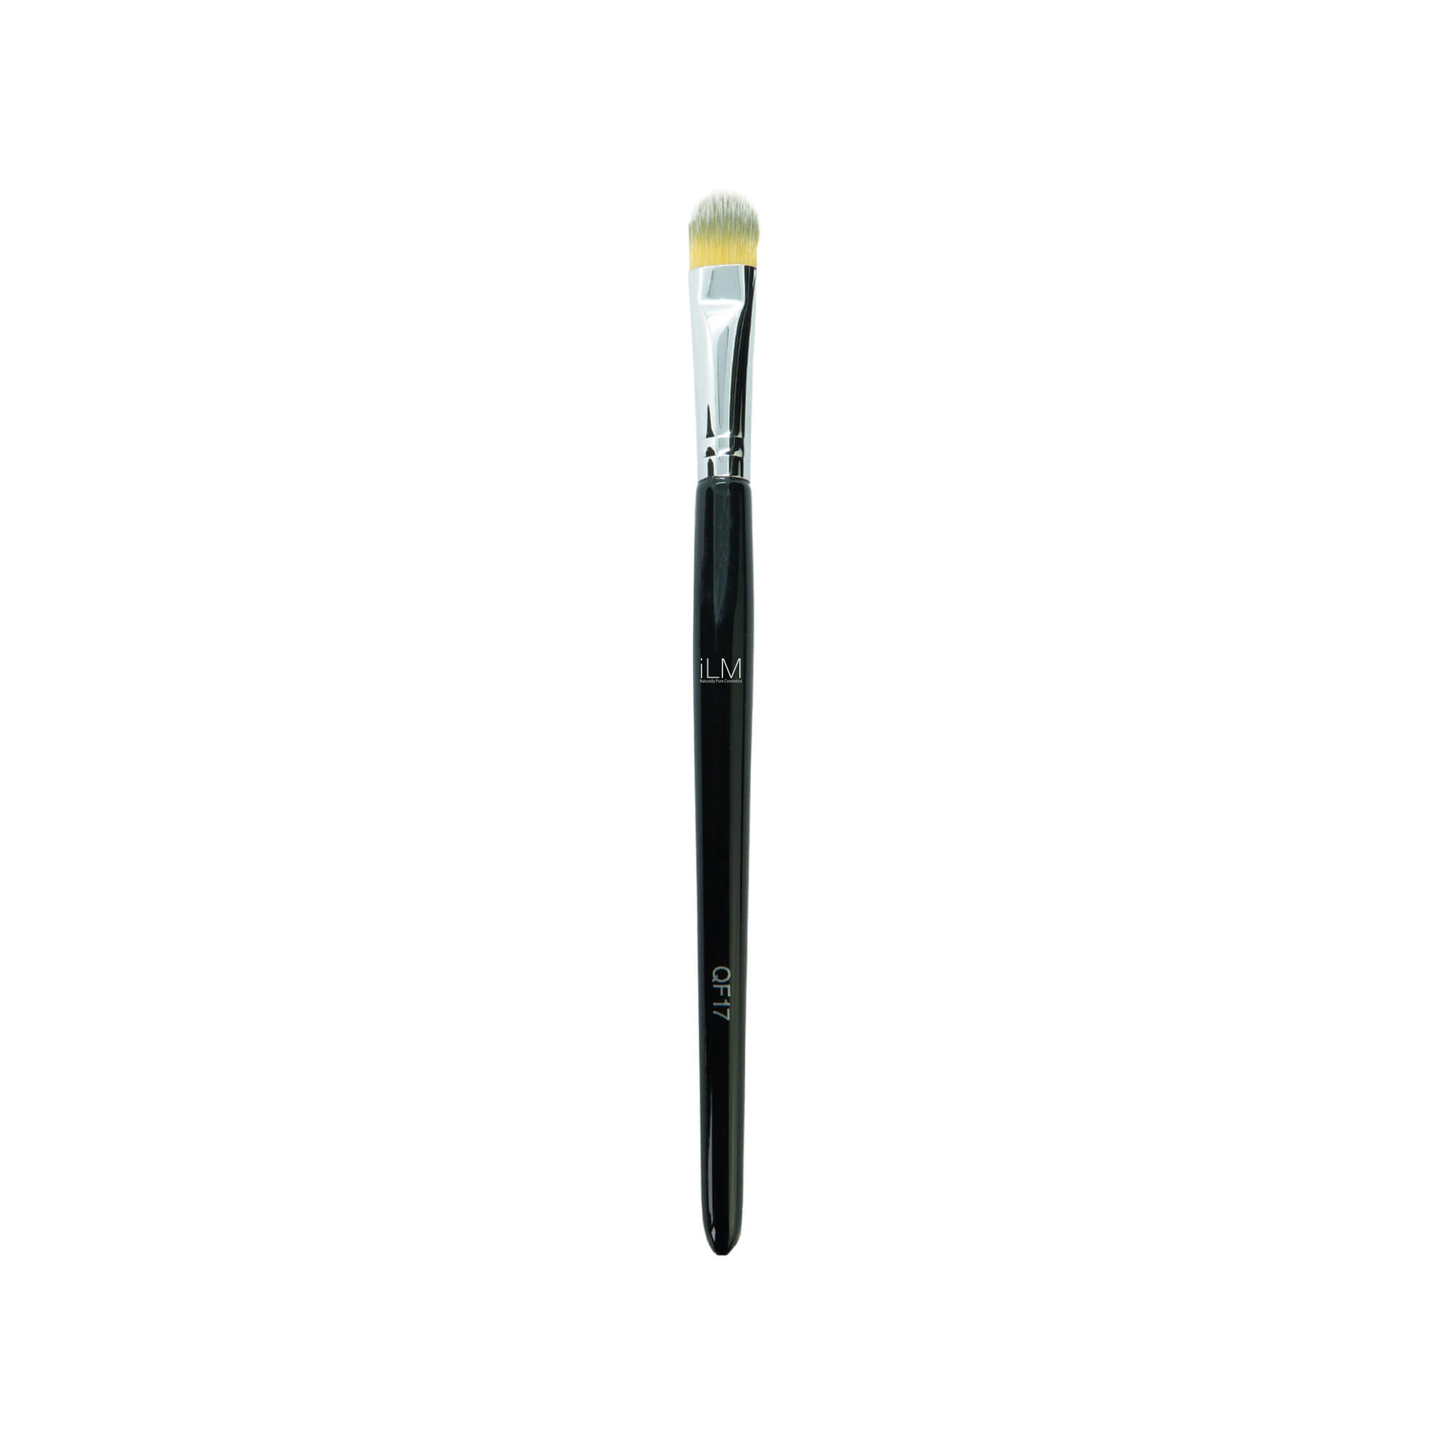 Introducing the iLM Cosmetic Conceal Brush - your go-to for flawless makeup coverage. Its soft yet firm bristles are expertly crafted to effortlessly apply and blend both cream and liquid concealers. Achieving a flawless finish has never been easier with this brush's precise bristles, allowing for superior product control and application.